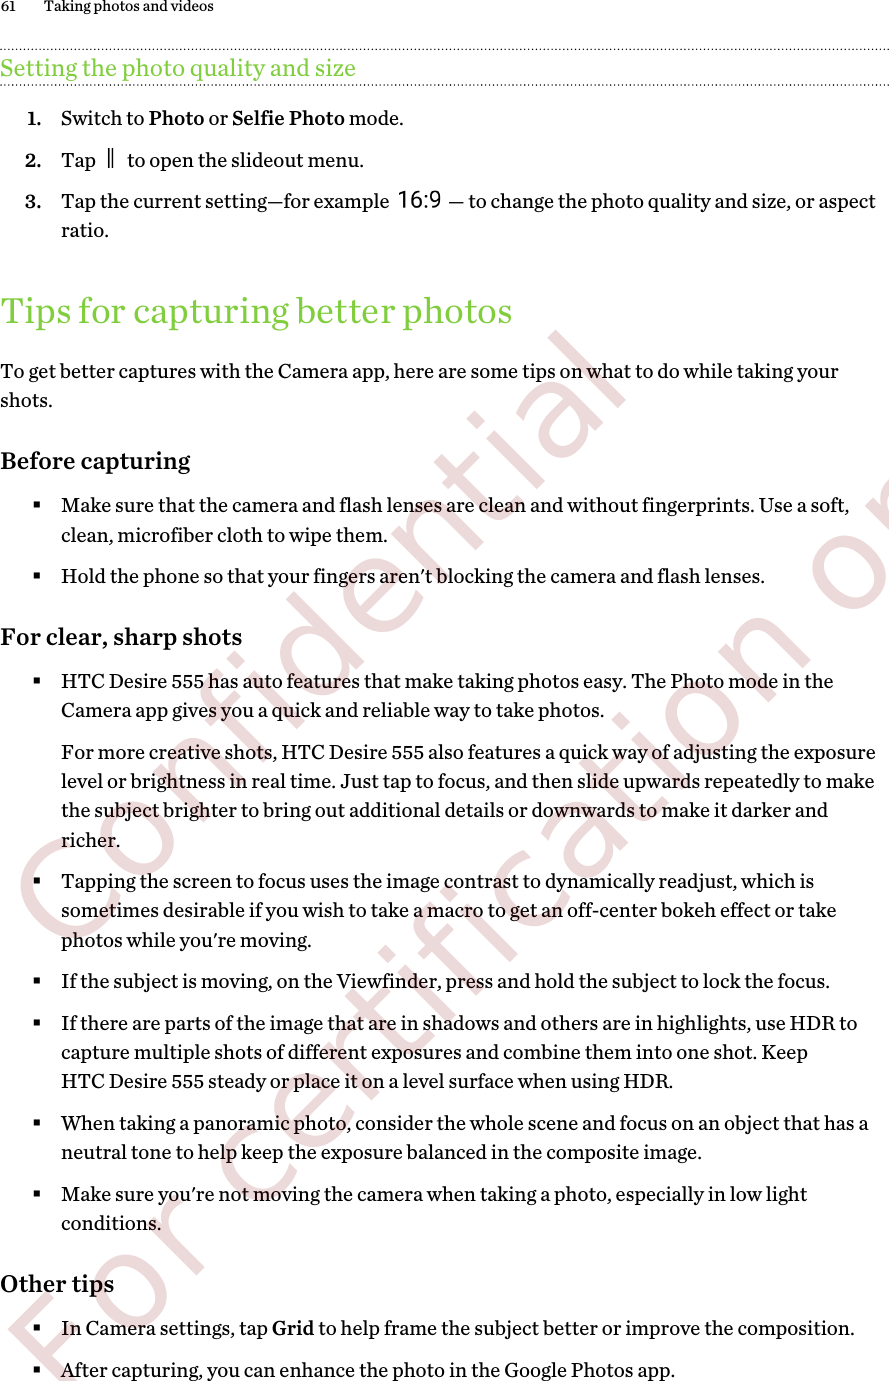 Setting the photo quality and size1. Switch to Photo or Selfie Photo mode.2. Tap   to open the slideout menu.3. Tap the current setting—for example  — to change the photo quality and size, or aspectratio.Tips for capturing better photosTo get better captures with the Camera app, here are some tips on what to do while taking yourshots.Before capturing§Make sure that the camera and flash lenses are clean and without fingerprints. Use a soft,clean, microfiber cloth to wipe them.§Hold the phone so that your fingers aren&apos;t blocking the camera and flash lenses.For clear, sharp shots§HTC Desire 555 has auto features that make taking photos easy. The Photo mode in theCamera app gives you a quick and reliable way to take photos.For more creative shots, HTC Desire 555 also features a quick way of adjusting the exposurelevel or brightness in real time. Just tap to focus, and then slide upwards repeatedly to makethe subject brighter to bring out additional details or downwards to make it darker andricher.§Tapping the screen to focus uses the image contrast to dynamically readjust, which issometimes desirable if you wish to take a macro to get an off-center bokeh effect or takephotos while you&apos;re moving.§If the subject is moving, on the Viewfinder, press and hold the subject to lock the focus.§If there are parts of the image that are in shadows and others are in highlights, use HDR tocapture multiple shots of different exposures and combine them into one shot. KeepHTC Desire 555 steady or place it on a level surface when using HDR.§When taking a panoramic photo, consider the whole scene and focus on an object that has aneutral tone to help keep the exposure balanced in the composite image.§Make sure you&apos;re not moving the camera when taking a photo, especially in low lightconditions.Other tips§In Camera settings, tap Grid to help frame the subject better or improve the composition.§After capturing, you can enhance the photo in the Google Photos app.61 Taking photos and videos        Confidential  For certification only